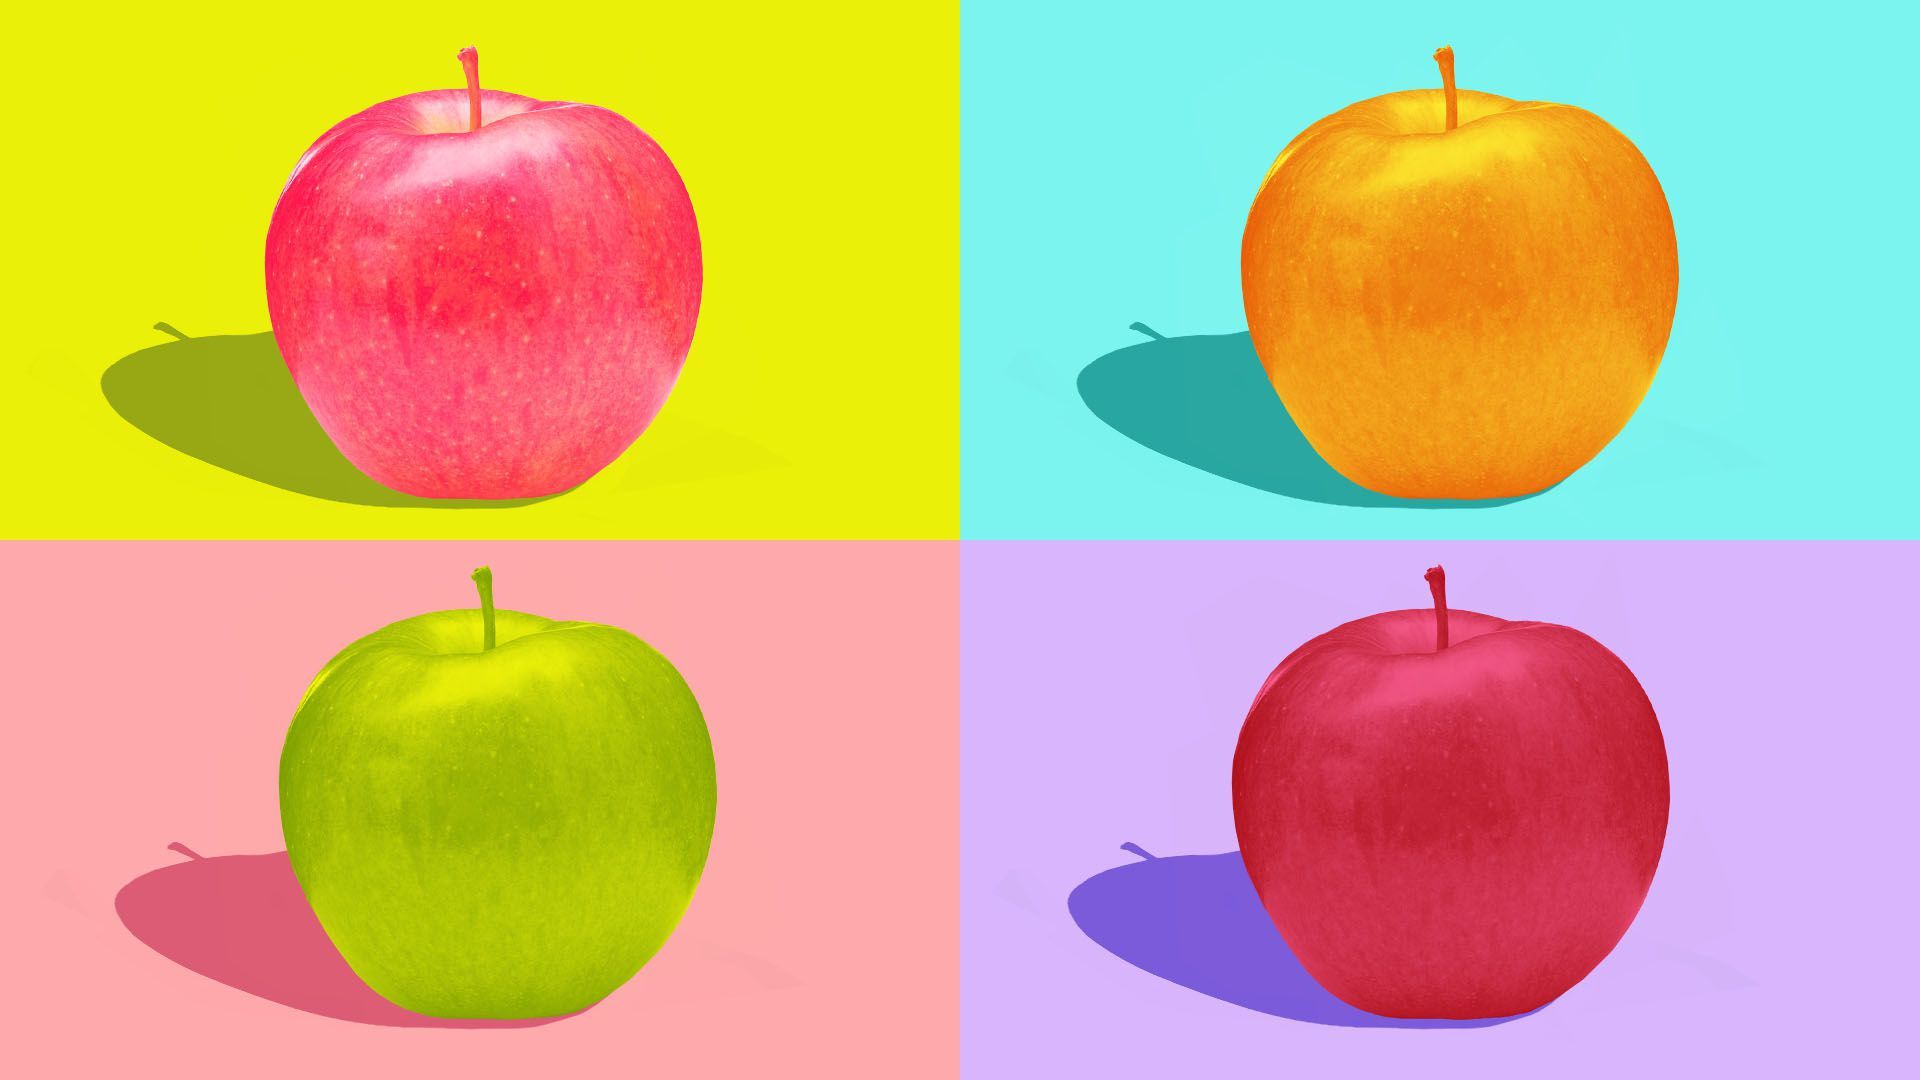 Illustration of four different colored apples on different backgrounds